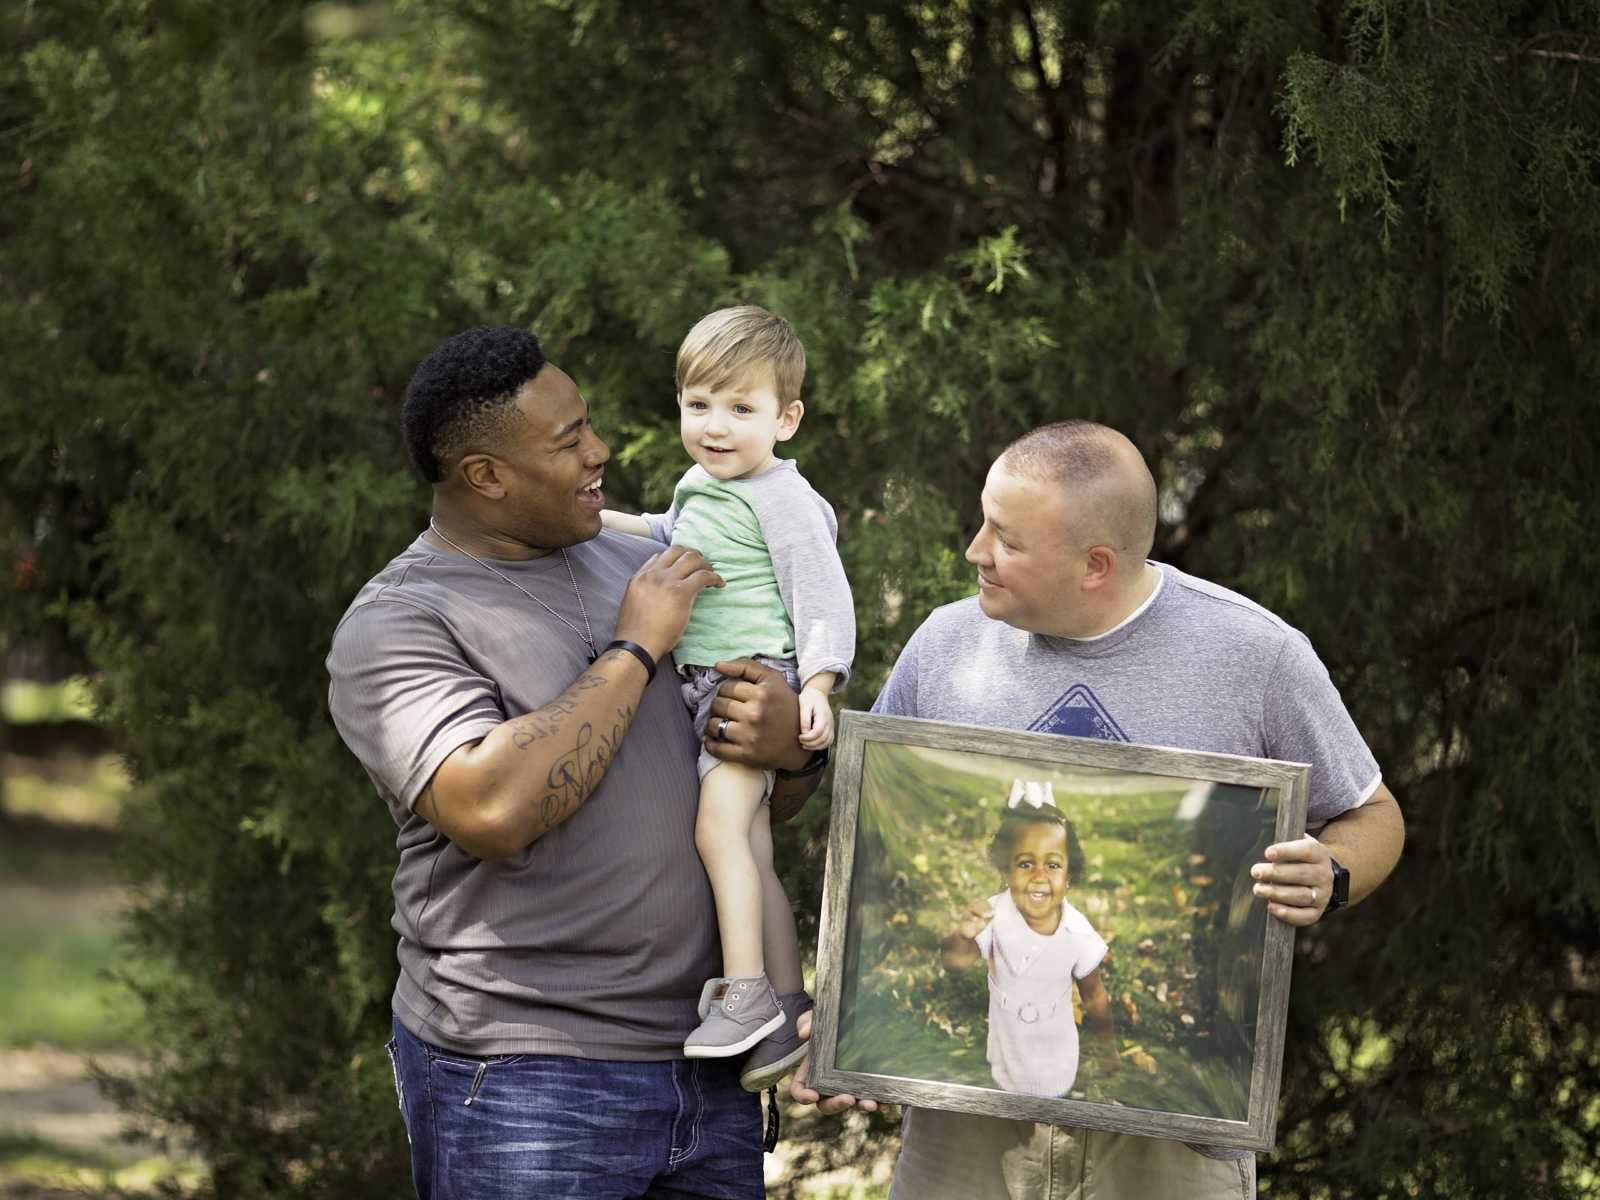 Man holds little boy whose father stands beside them holding picture frame of deceased little girl